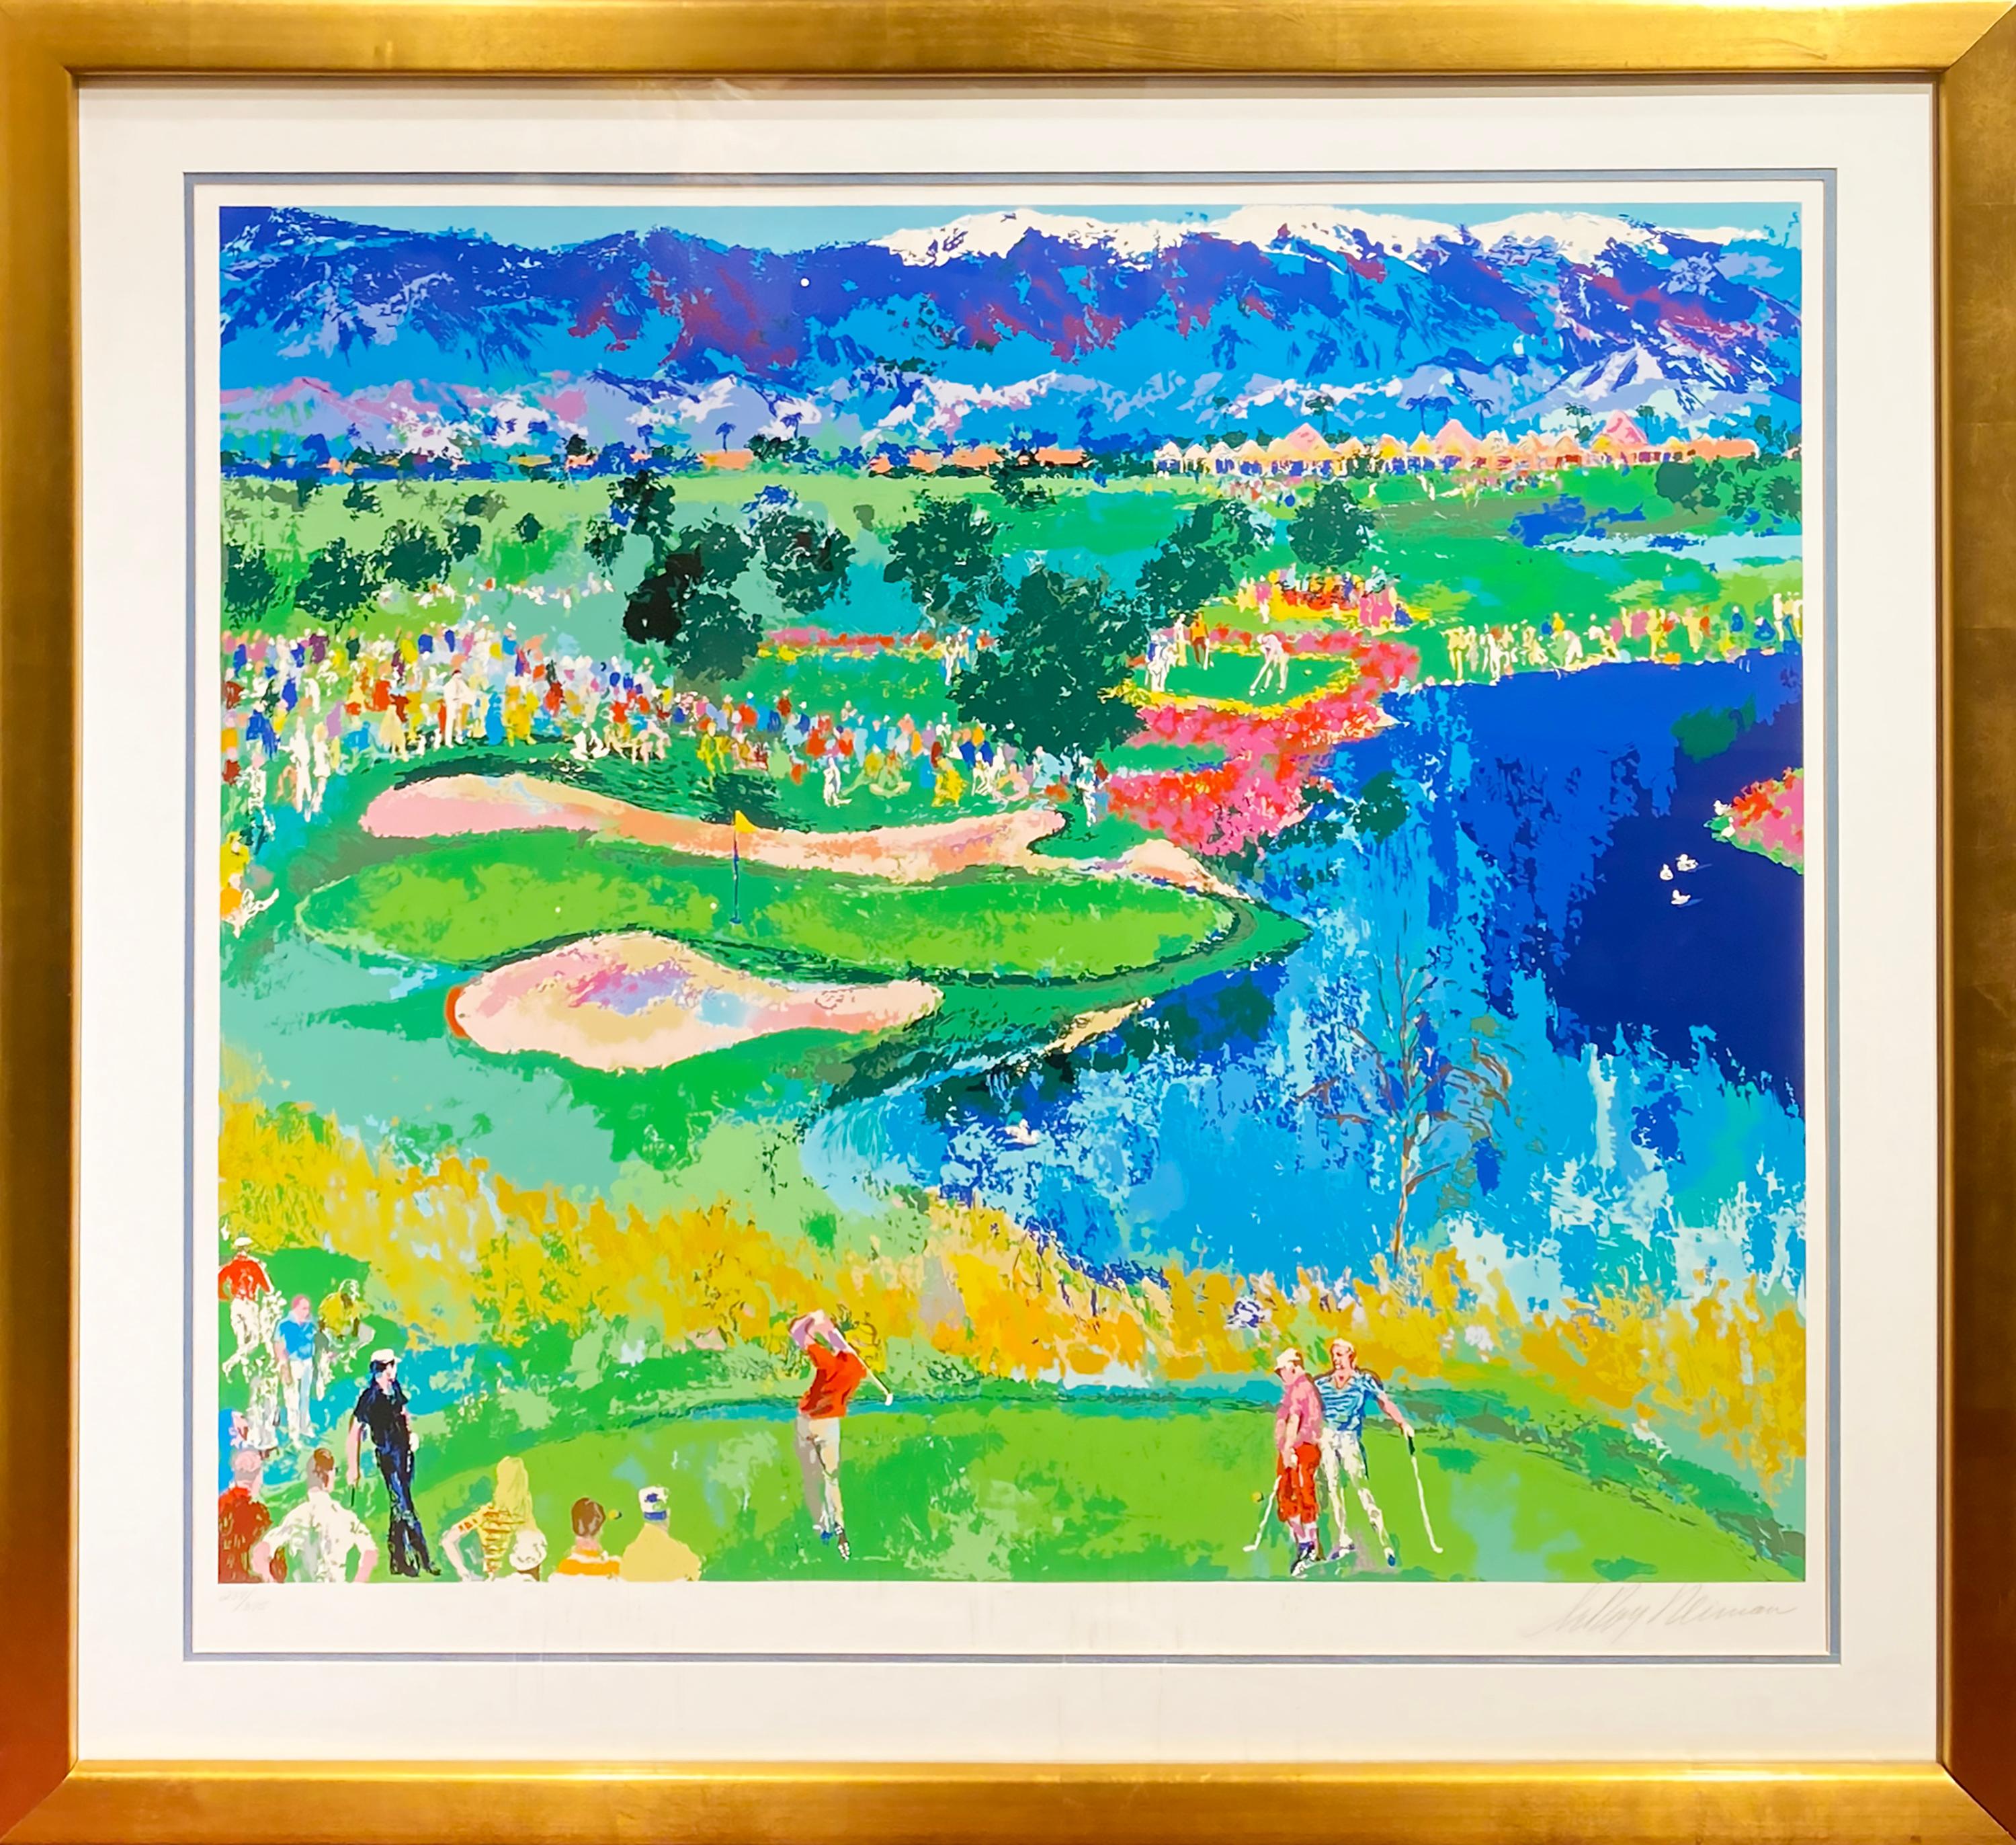 Cove at Vintage - Print by Leroy Neiman